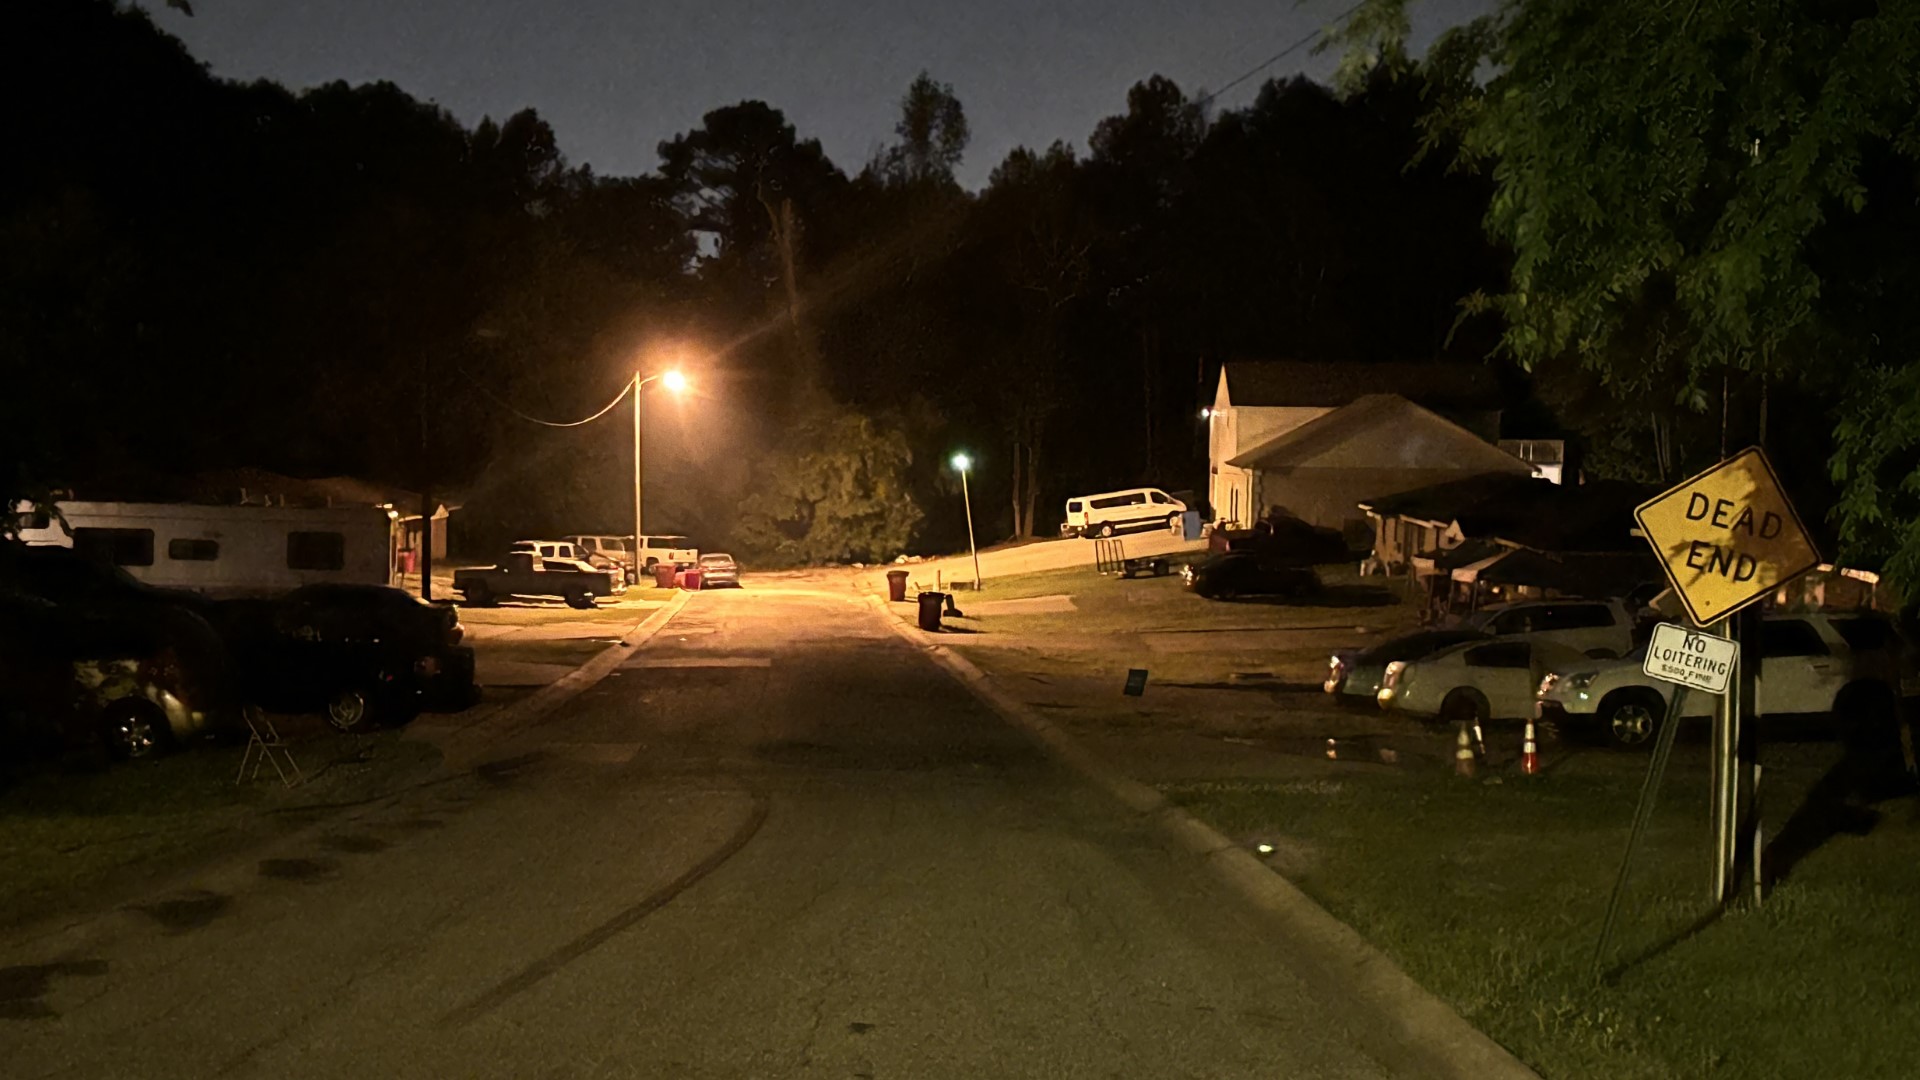 This marks Macon's 10th homicide just in the month of April